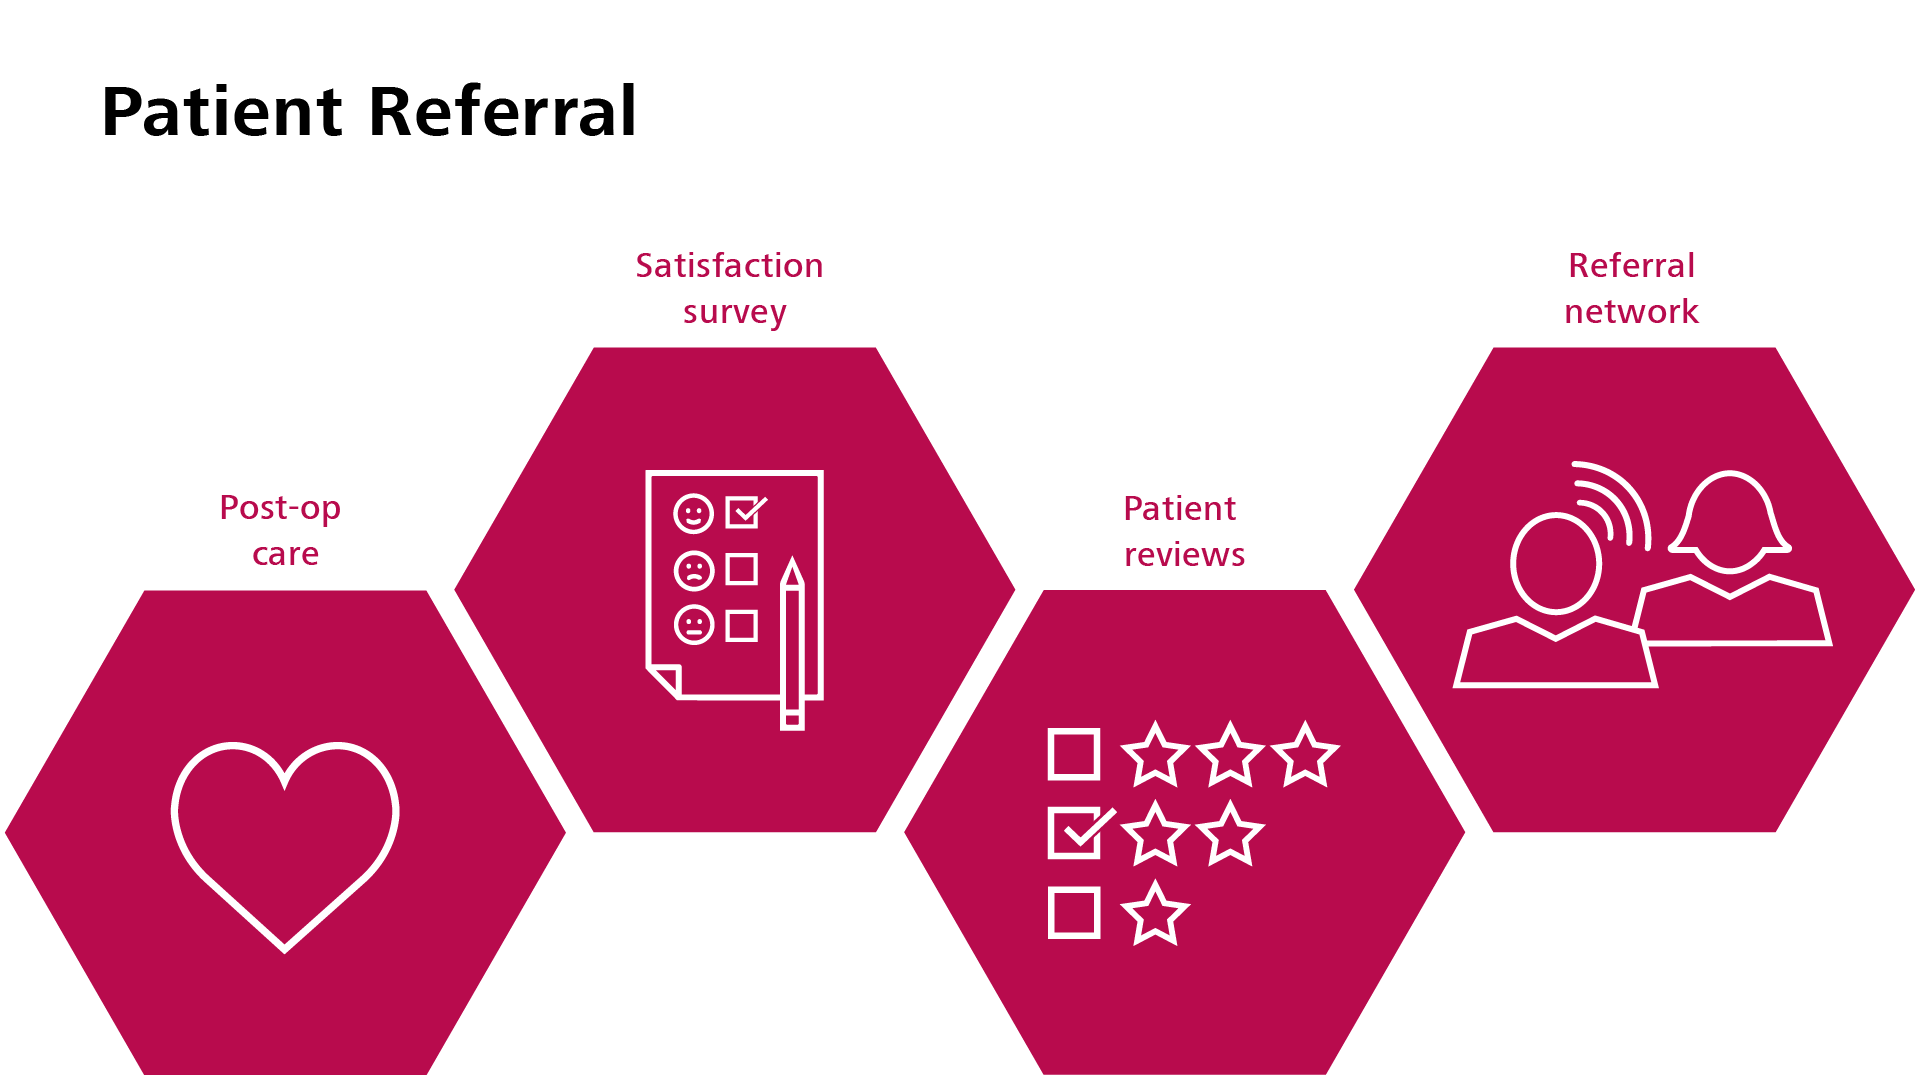 schematic illustration of the Patient Referral